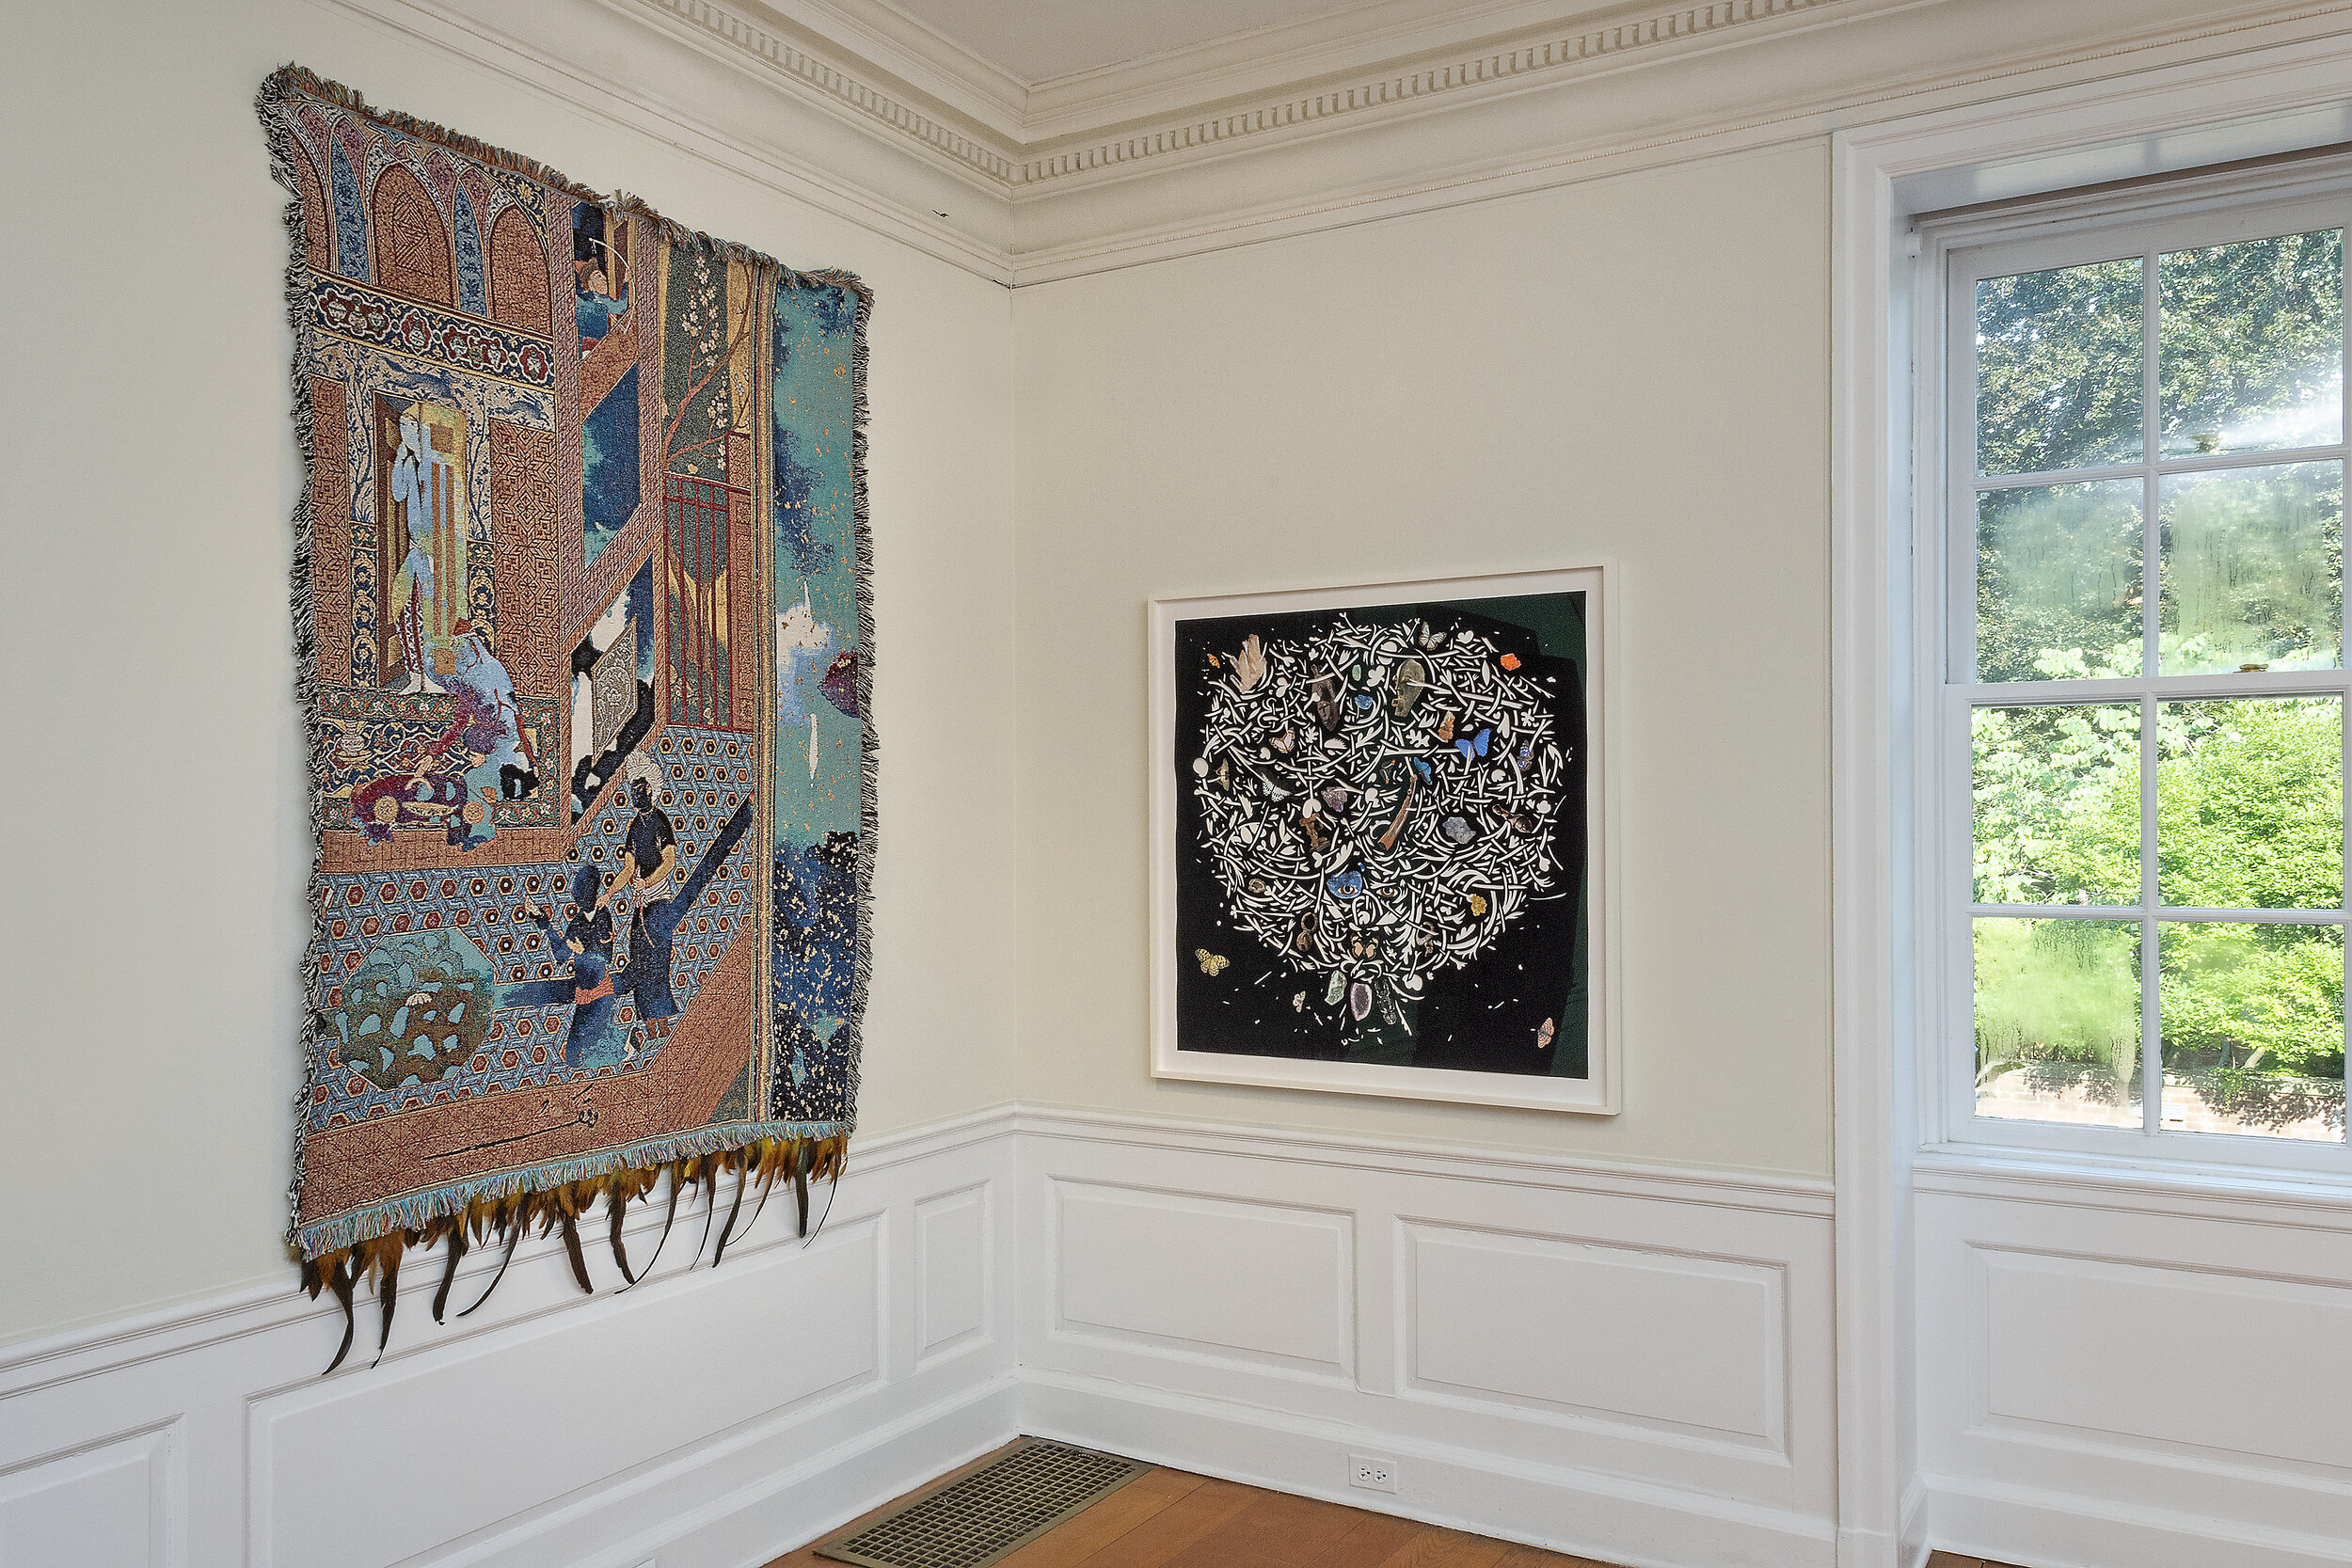  From left to right: Natalia Nakazawa, “Language of Birds” (2019), jacquard woven textiles and tapestry, 71 x 53 inches (courtesy of the artist); William Villalongo, “Brother, Brother” (2019), acrylic, cut velour paper and pigment print collage, 39 7